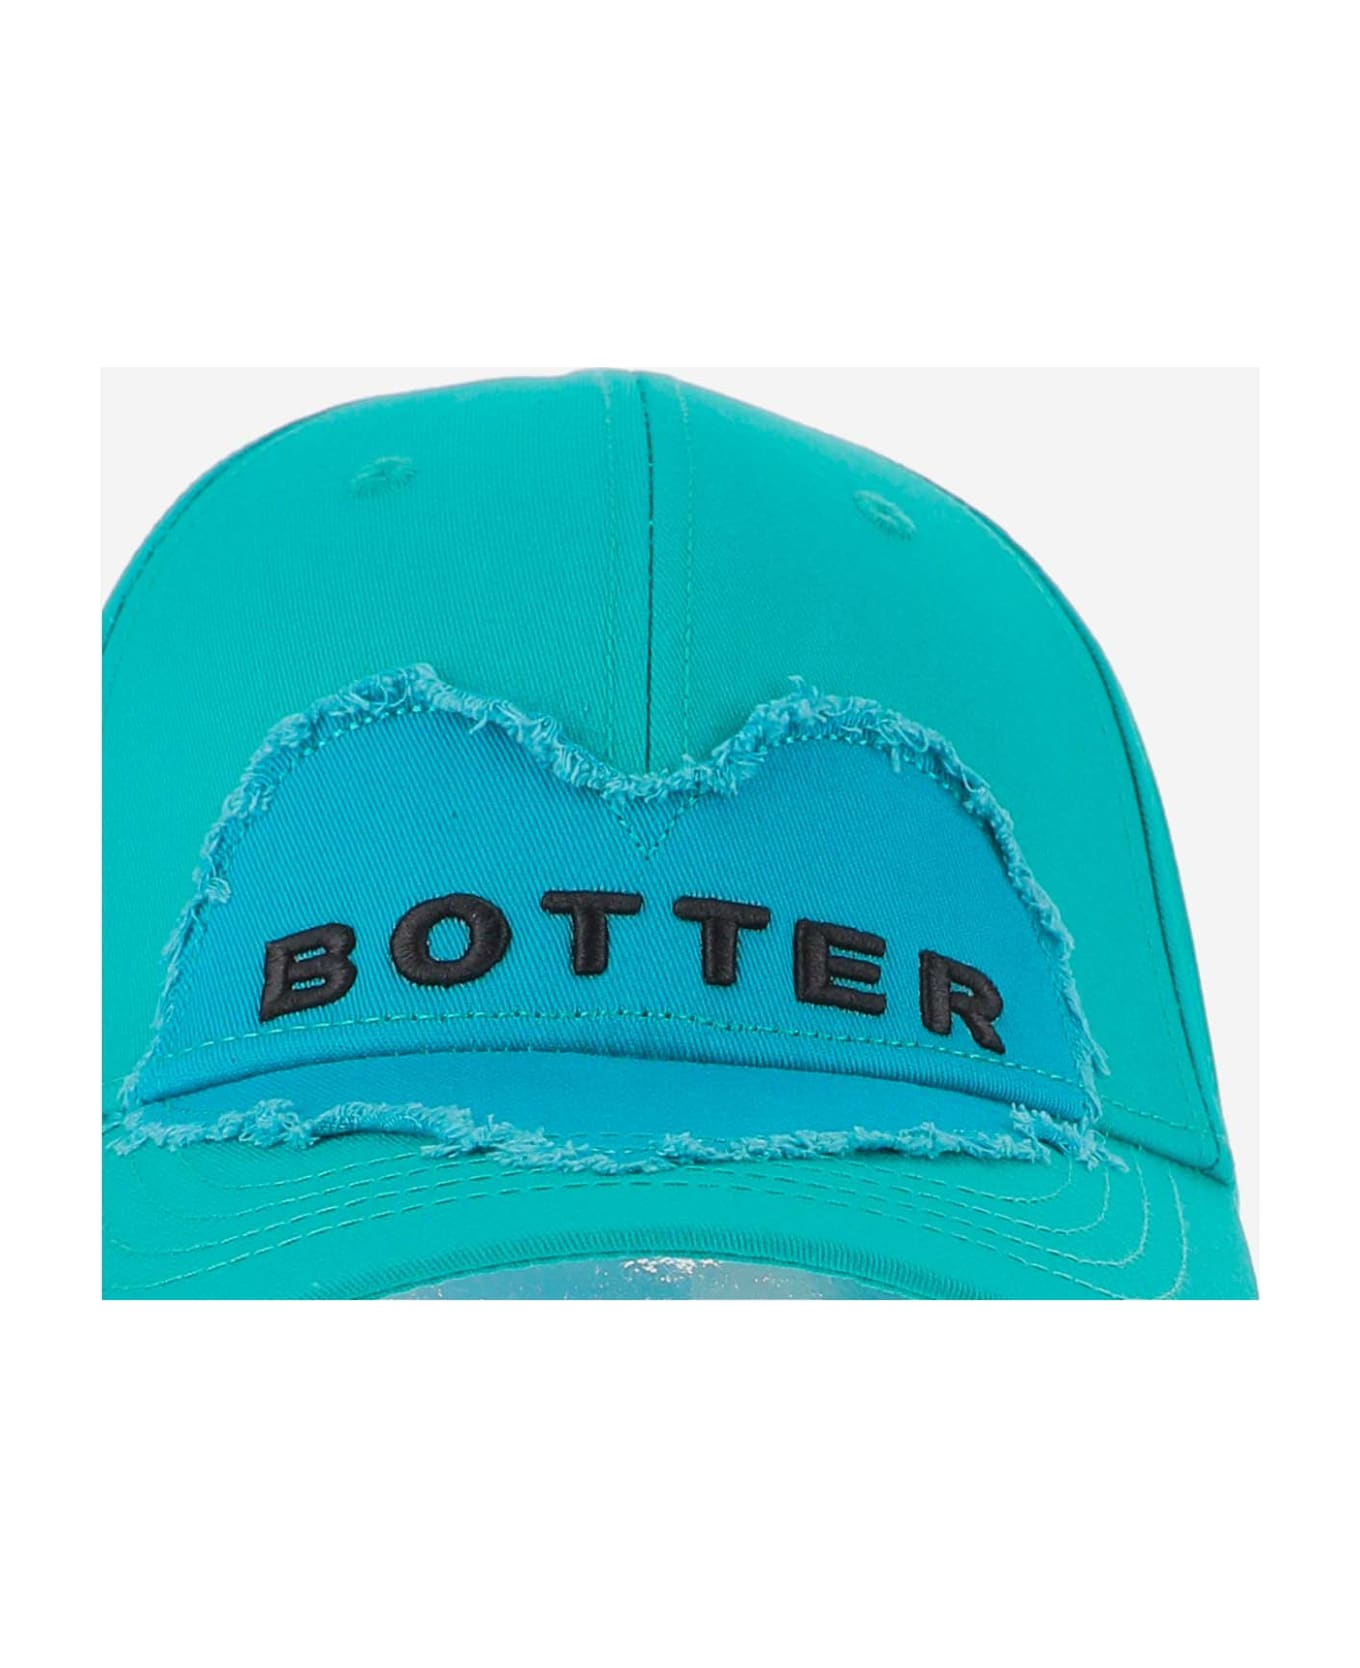 Botter Baseball Cap With Embroidered Logo - Red